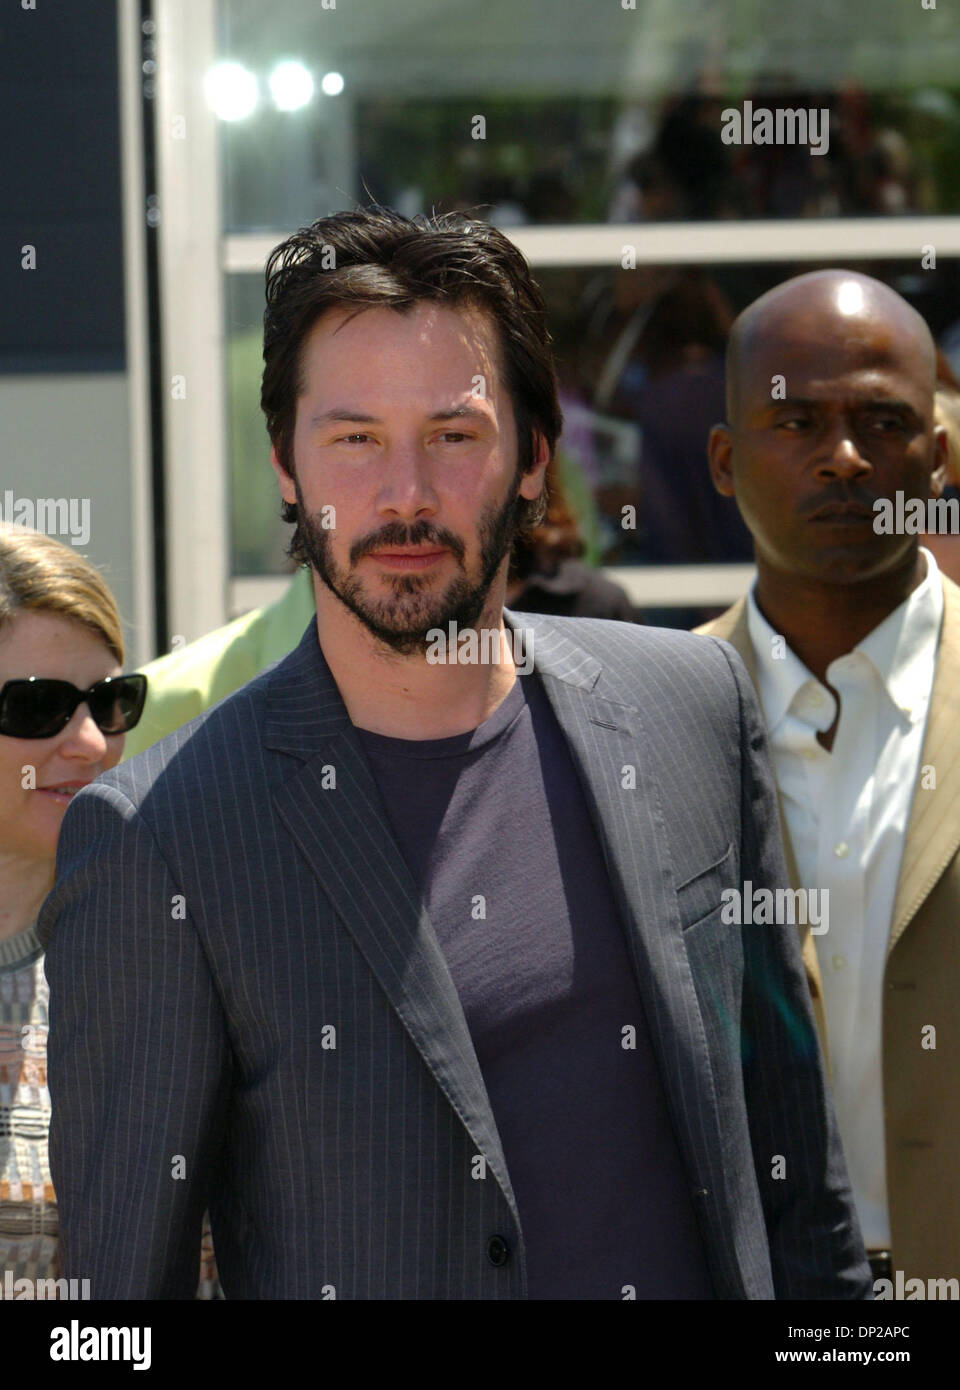 May 25, 2006; Cannes, FRANCE; KEANU REEVES at 'A Scanner Darkly' photocall during the 59th Cannes International Film Festival. Mandatory Credit: Photo by Frederic Injimbert/ZUMA Press. (©) Copyright 2006 by Frederic Injimbert Stock Photo